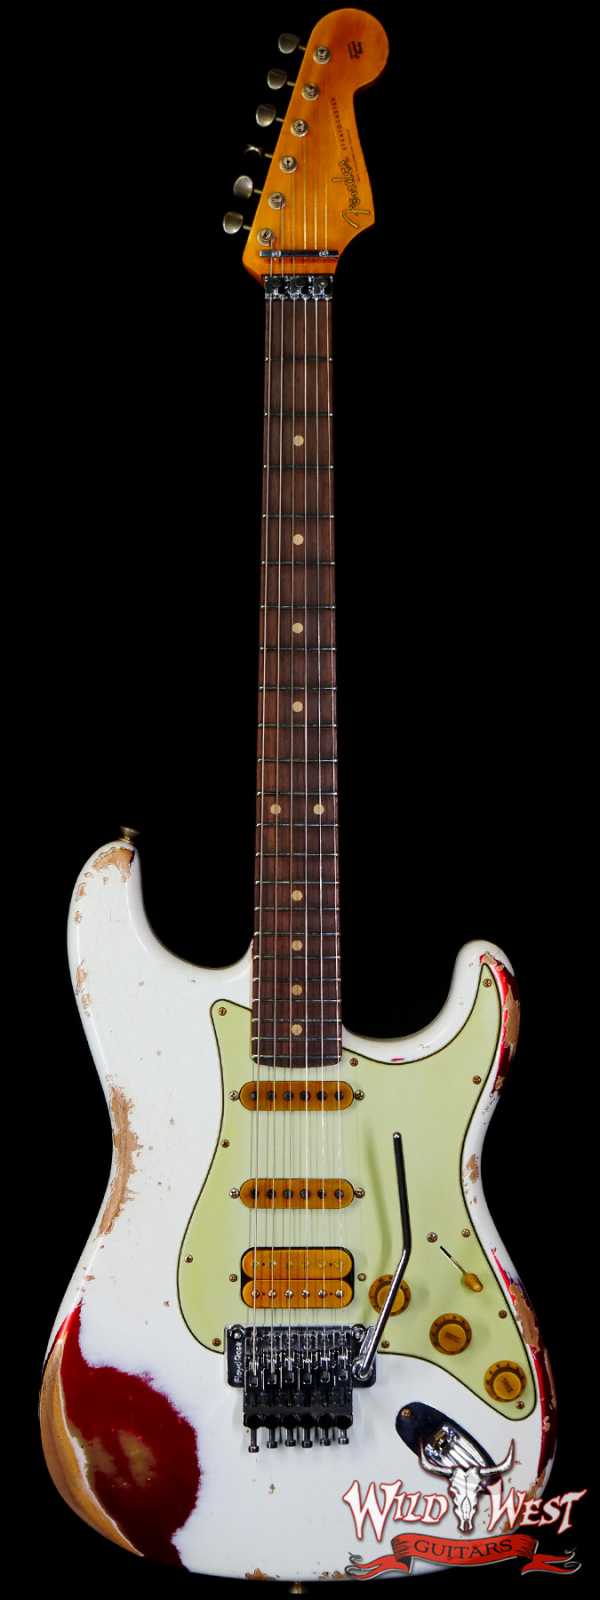 Fender Custom Shop Wild West White Lightning Stratocaster HSS Floyd Rose Rosewood Board 22 Frets Heavy Relic Candy Apple Red